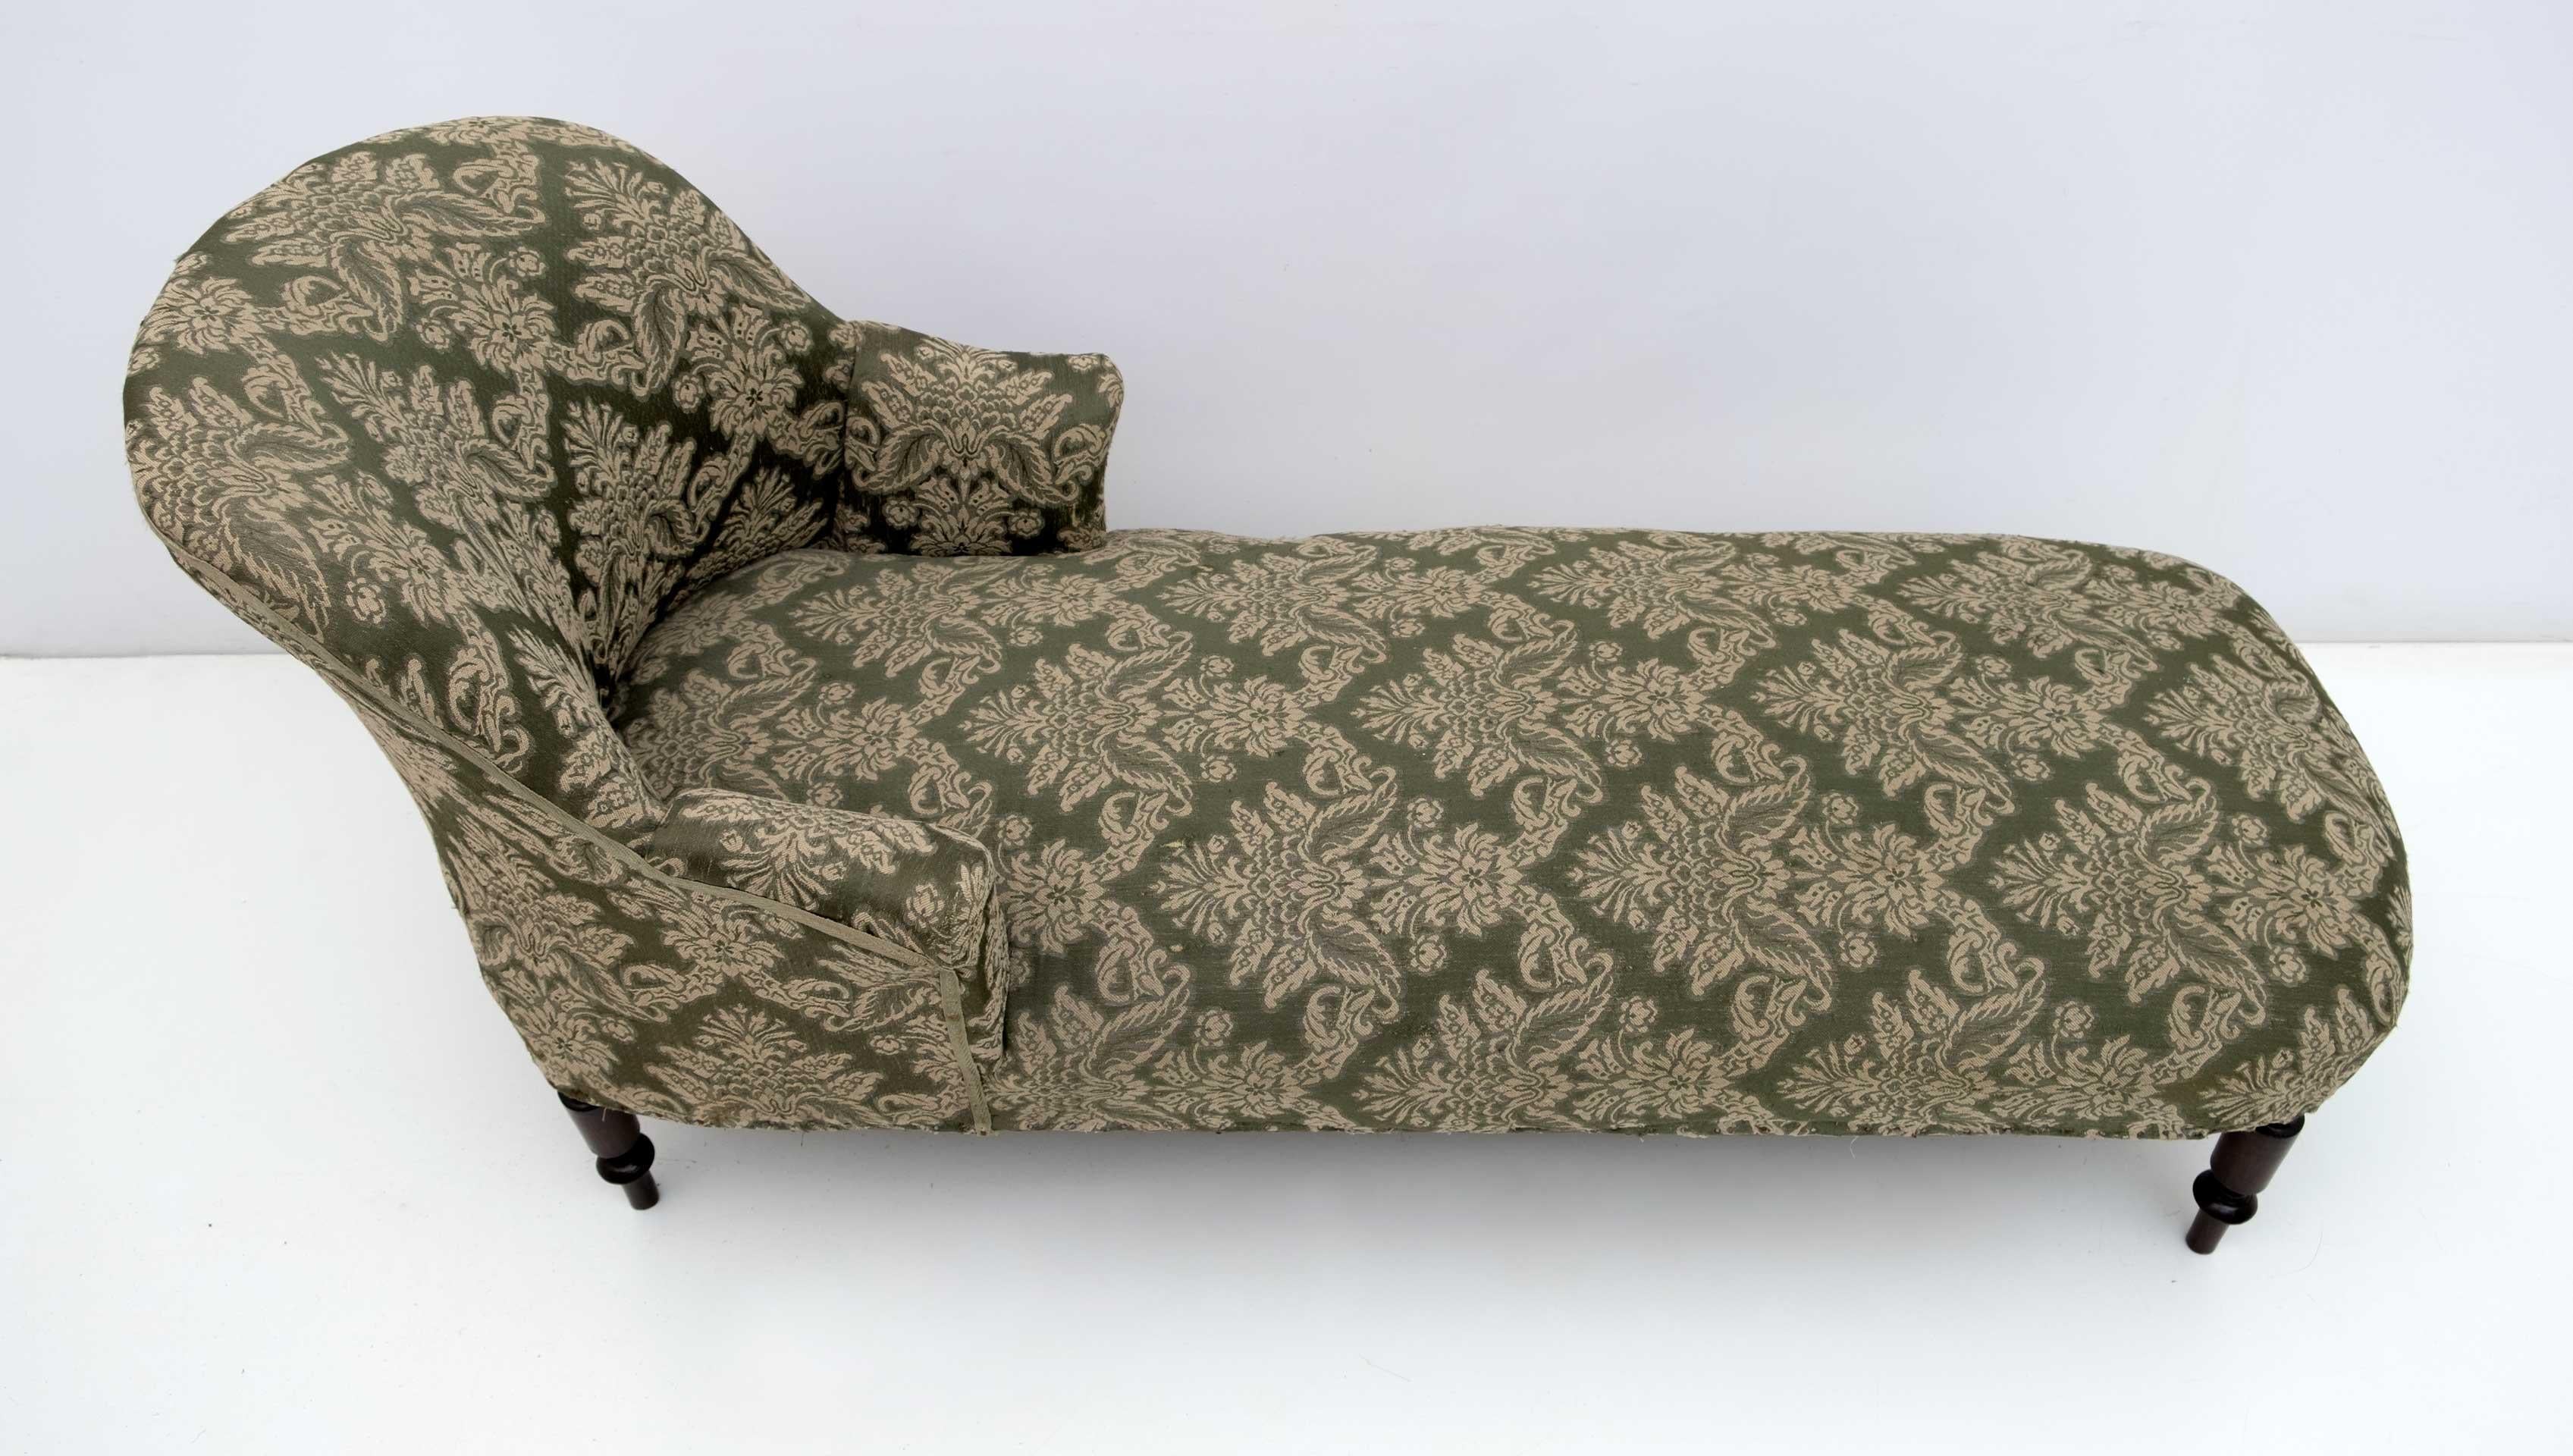 This elegant French Napoleon III chaise longue is a timeless classic. Its sophisticated 